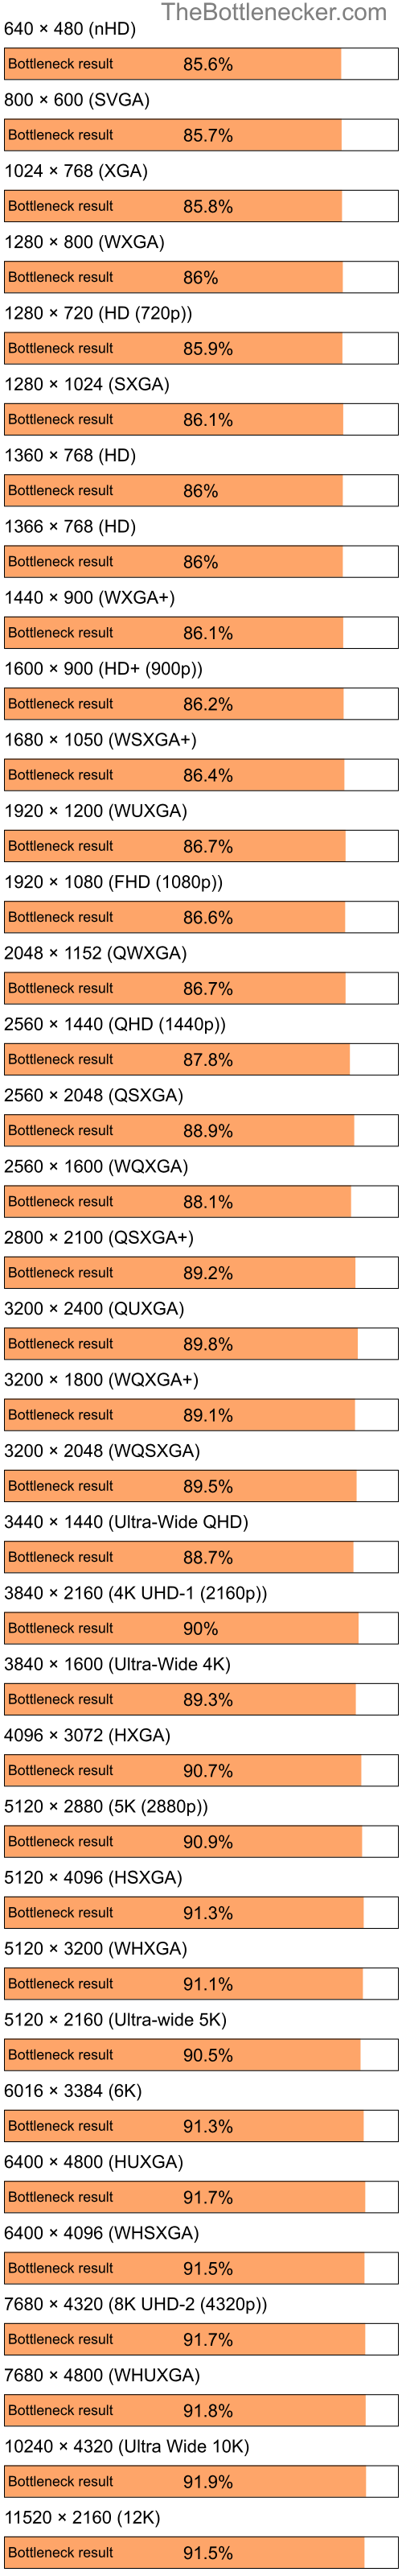 Bottleneck results by resolution for Intel Celeron M and NVIDIA GeForce Go 6100 in Graphic Card Intense Tasks